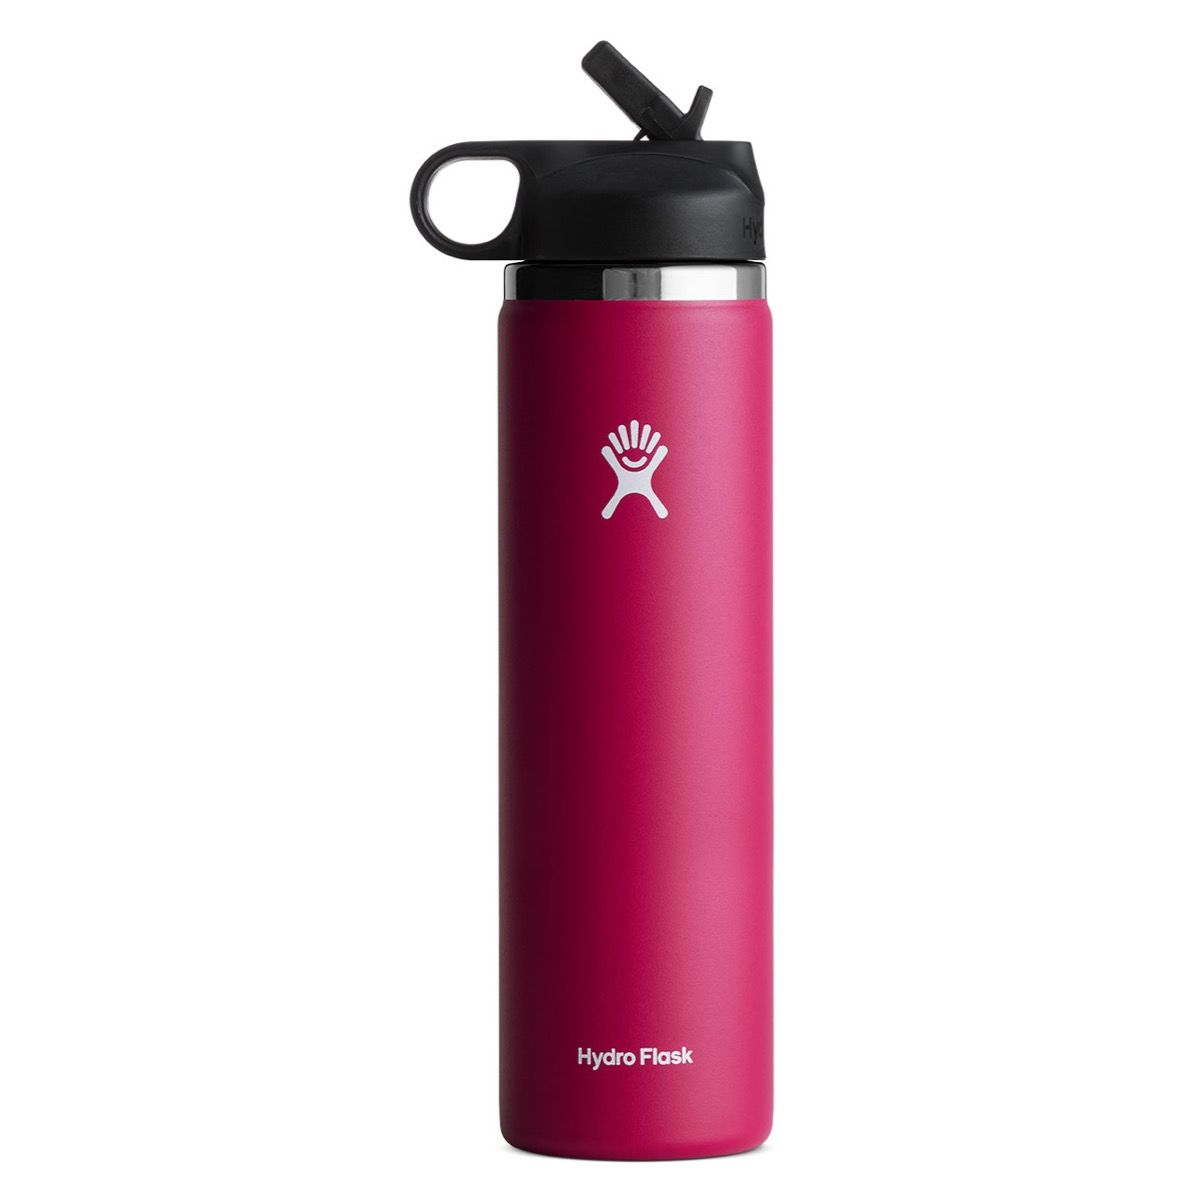 Hydro Flask 24 oz Wide Mouth w/ Straw Lid Accessories Hydro Flask Snapper-604  